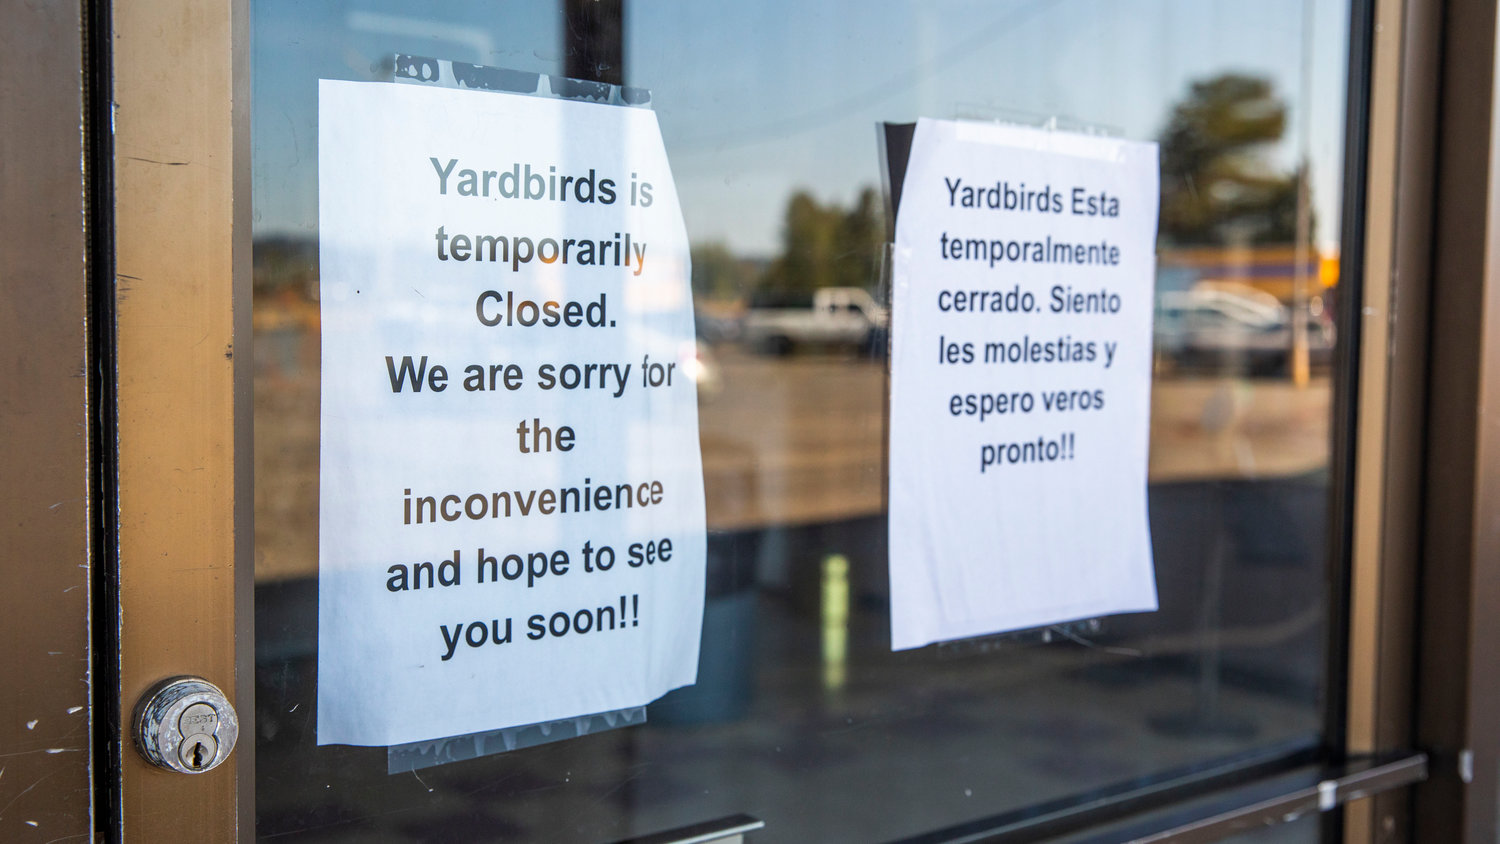 Signage posted at enterances to the Yard Birds Mall states the building is “temporarily closed” on Monday.